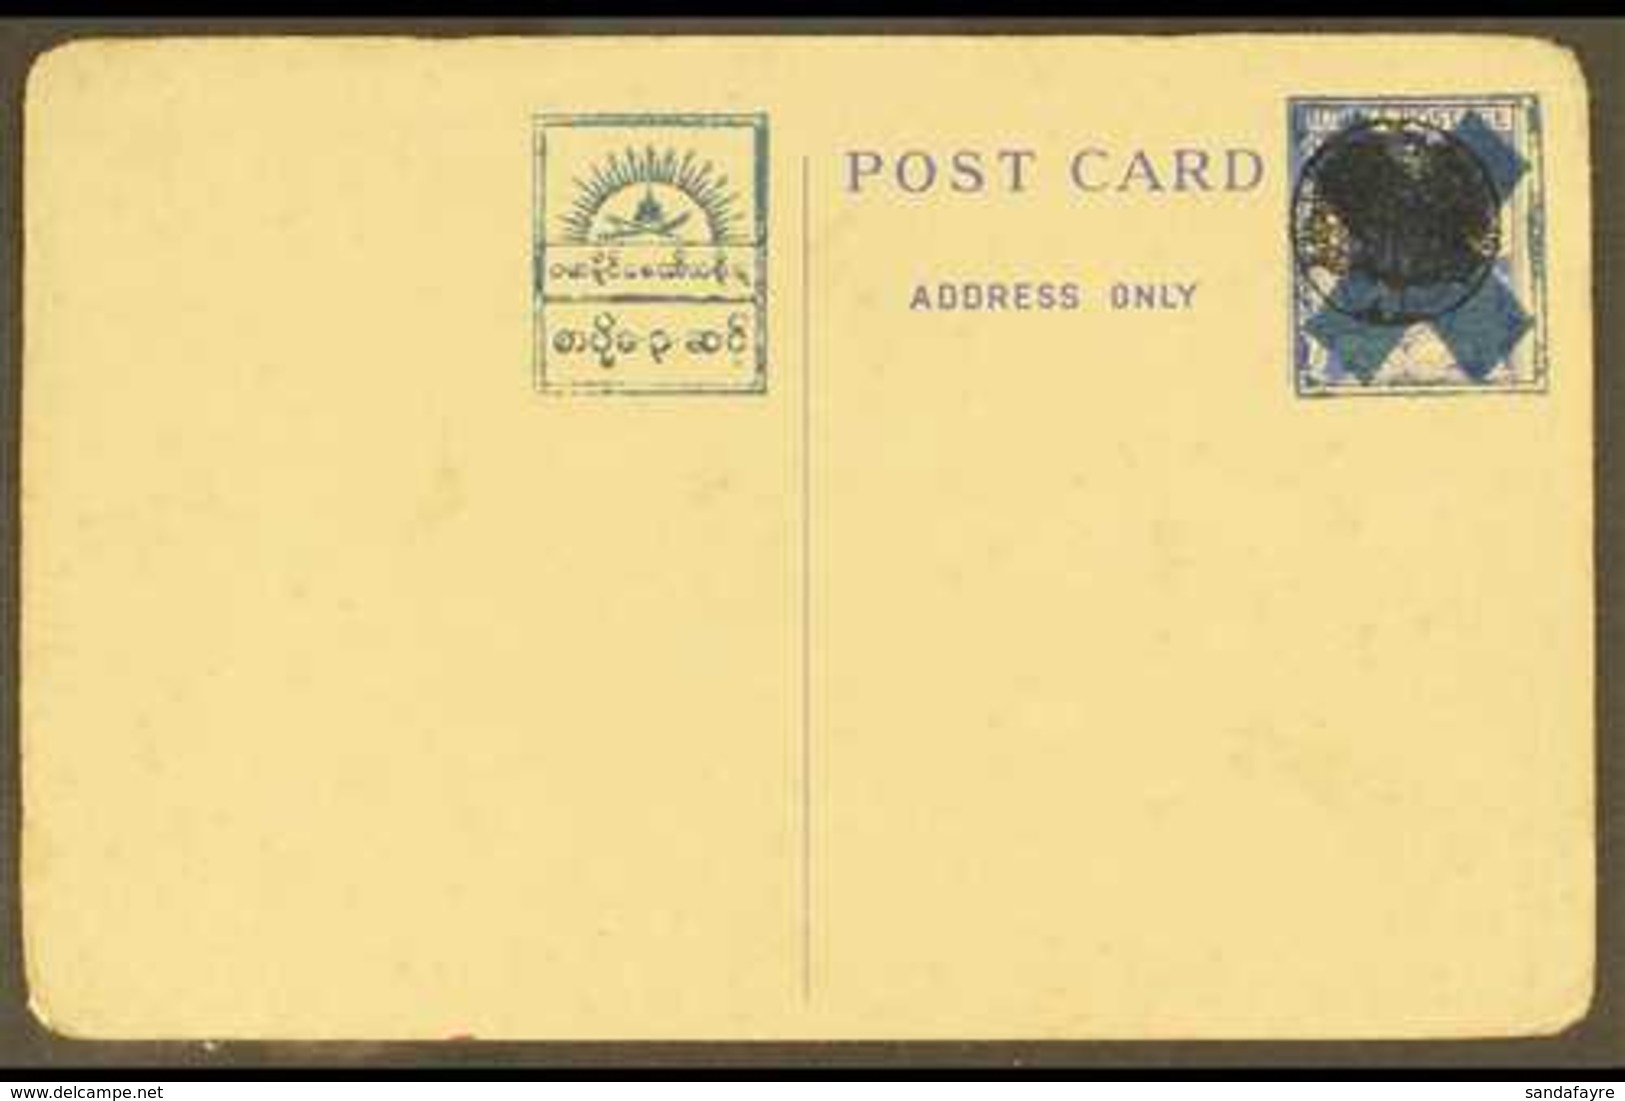 JAPANESE OCCUPATION JAPANESE POSTAL ADMINISTRATION 1943 6p Blue Postal Stationery Postcard With Peacock Overprint In Bla - Birmania (...-1947)